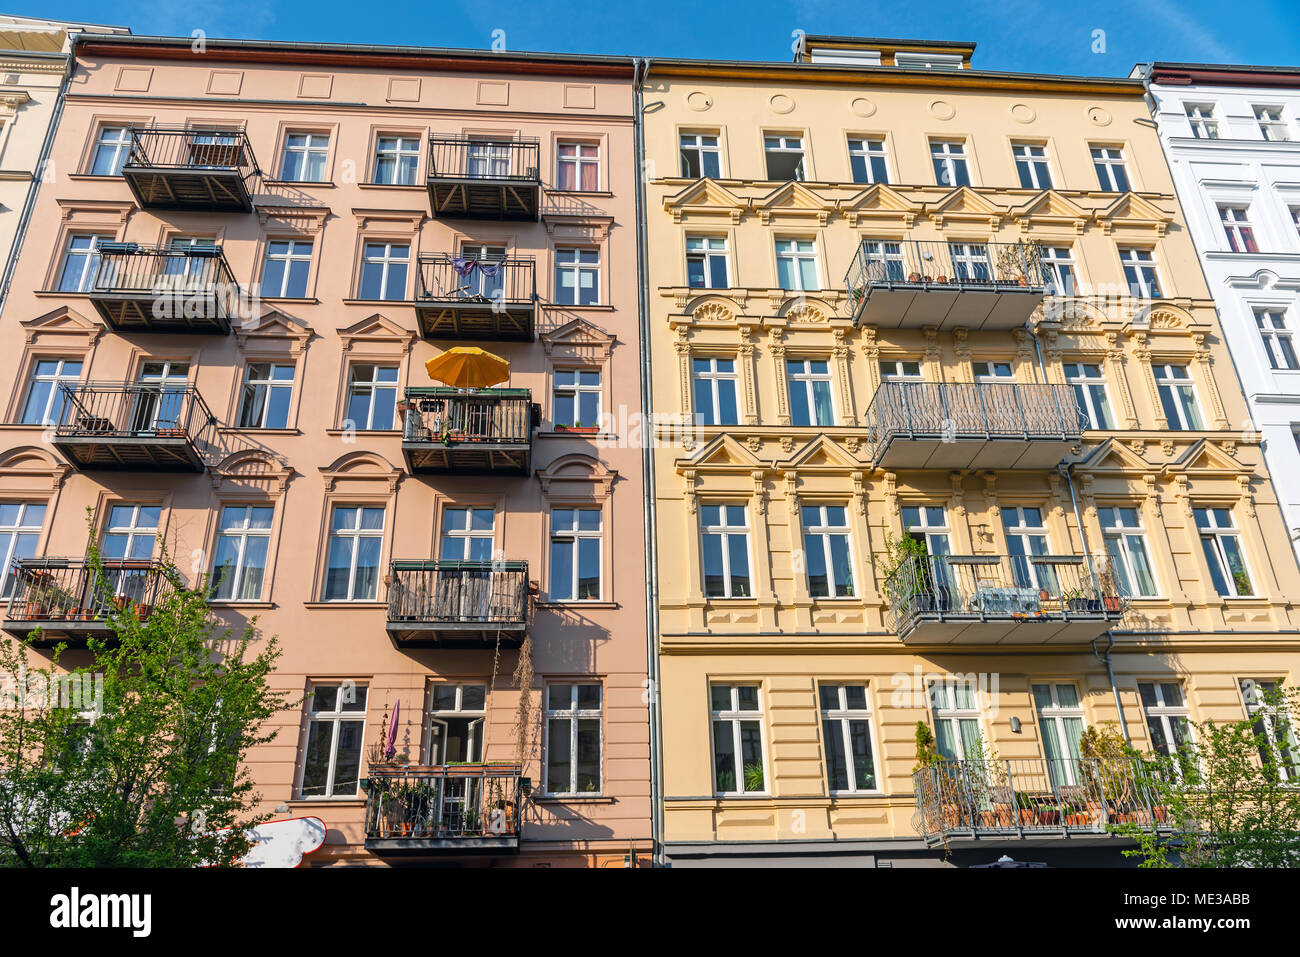 Colorful restored old residential construction seen at the Prenzlauer Berg district in Berlin, Germany Stock Photo